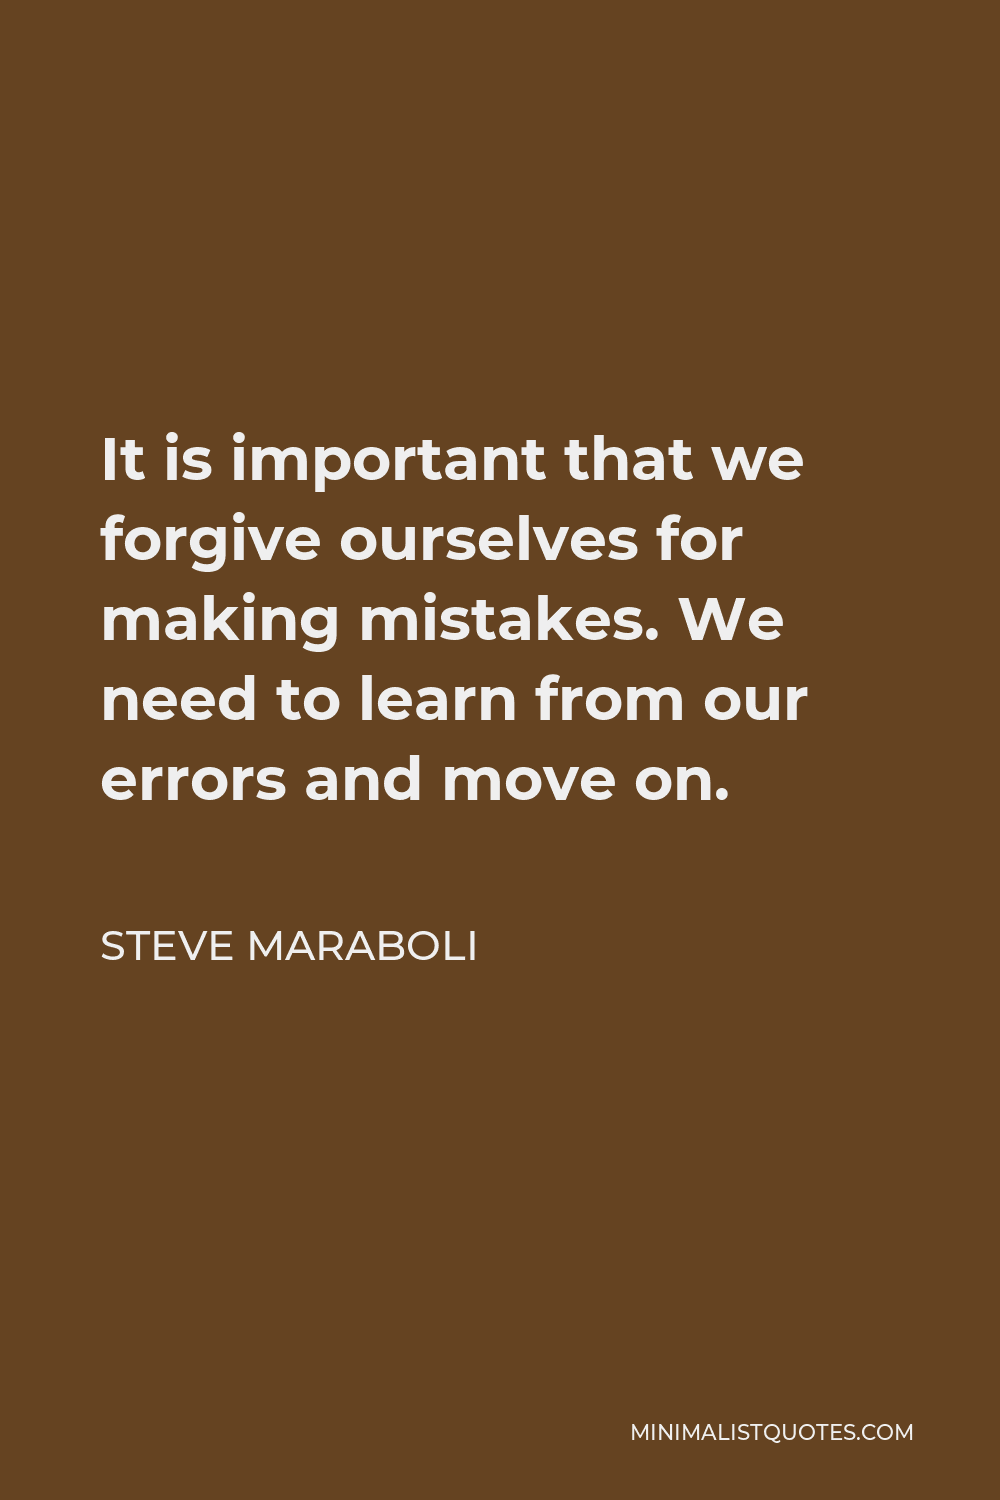 Steve Maraboli Quote - It is important that we forgive ourselves for making mistakes. We need to learn from our errors and move on.